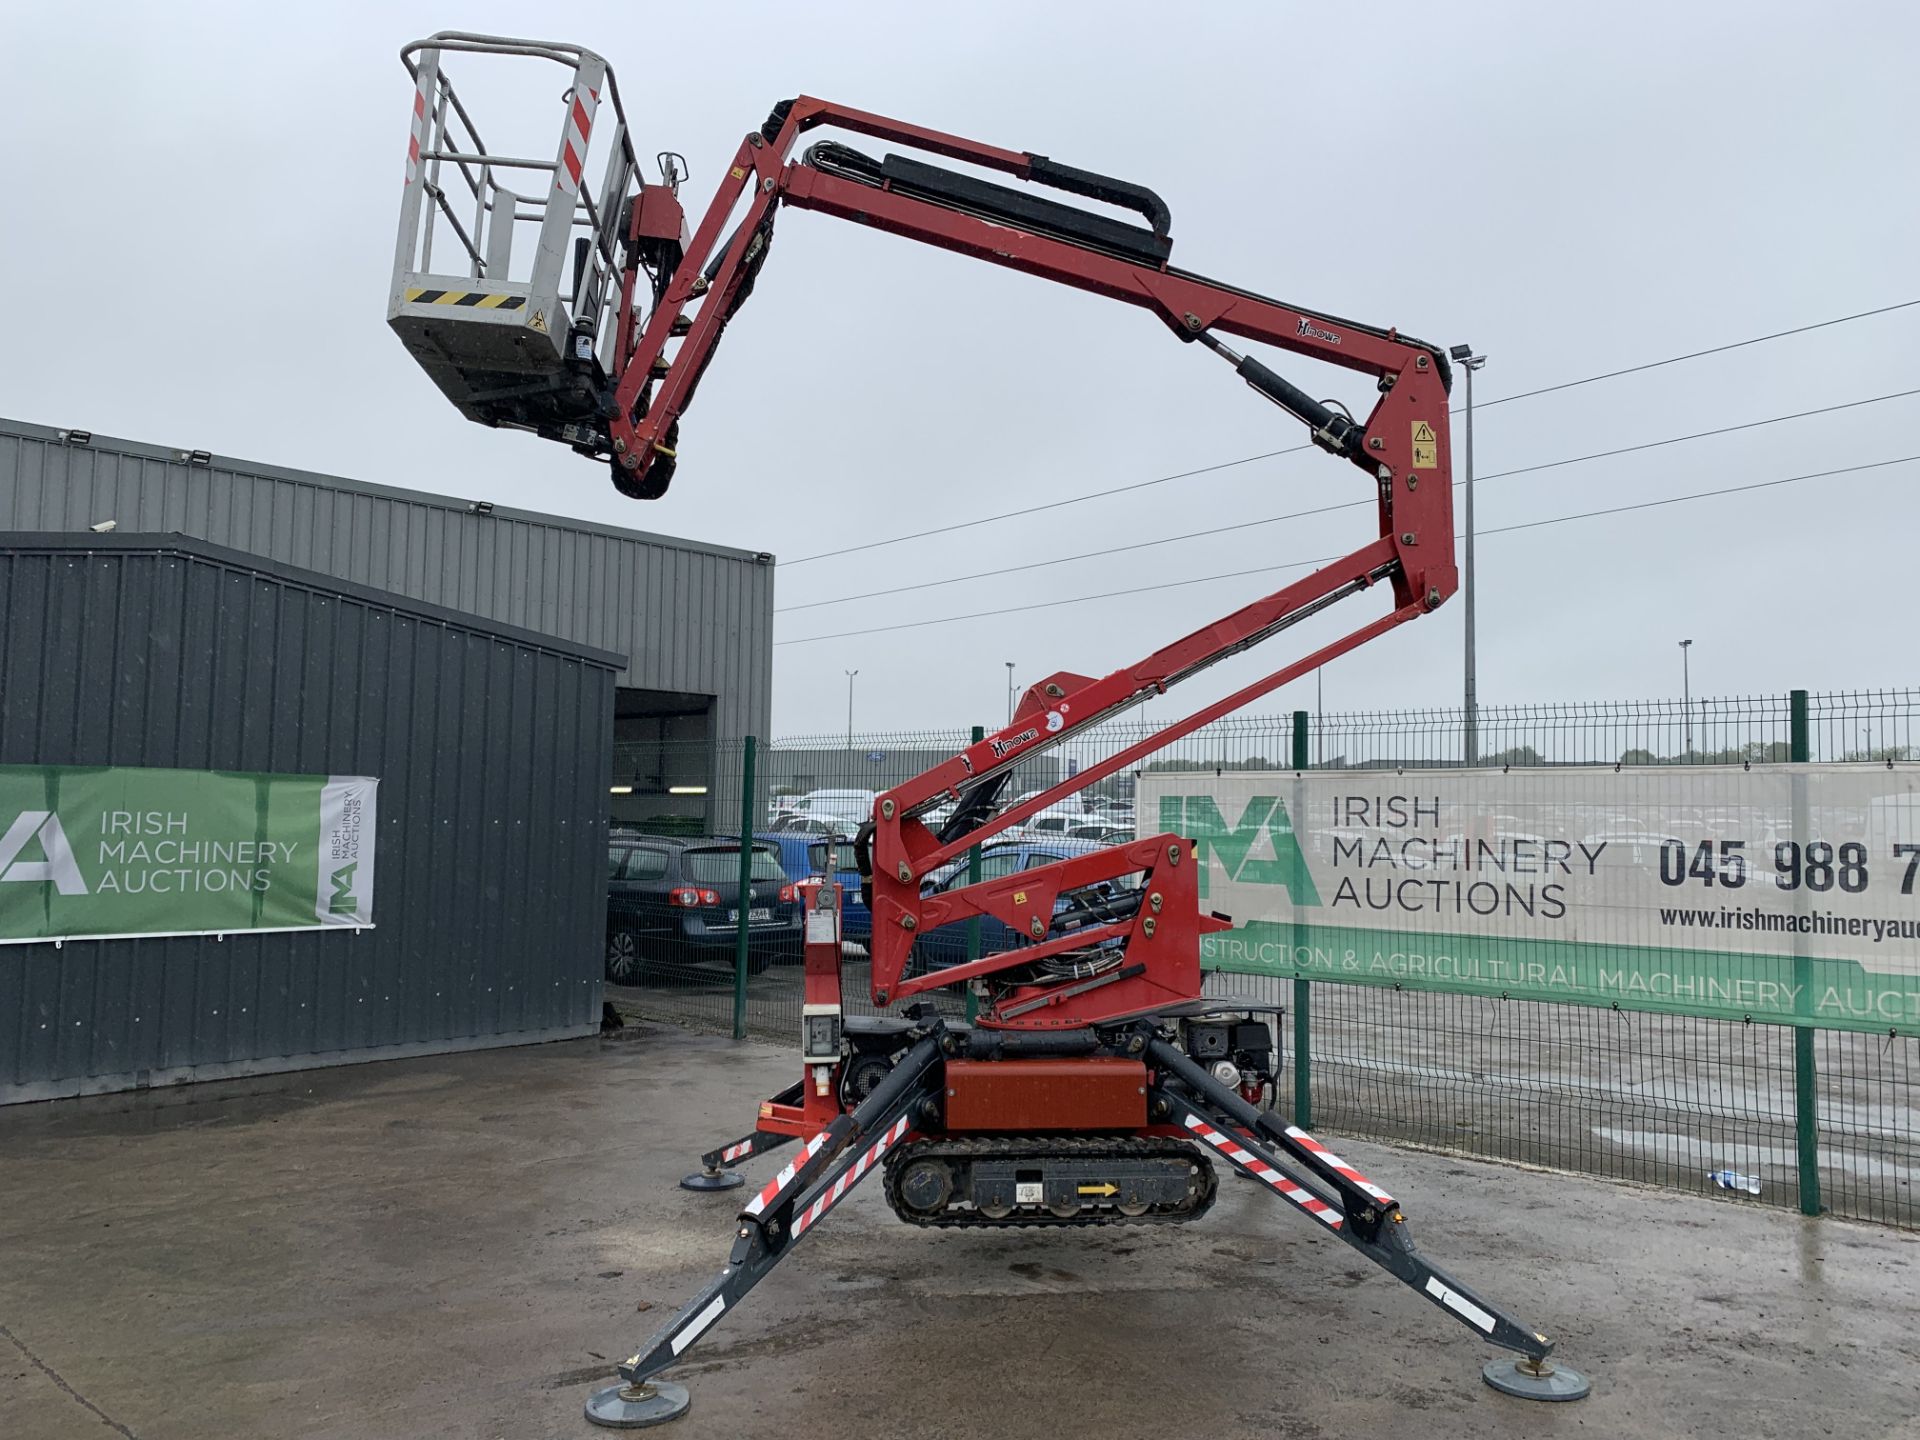 PL-15347 2007 Hinowa Goldlift 1470 Tracked Petrol Articulated Spider Boom Lift c/w Jack Legs & Key S - Image 10 of 25